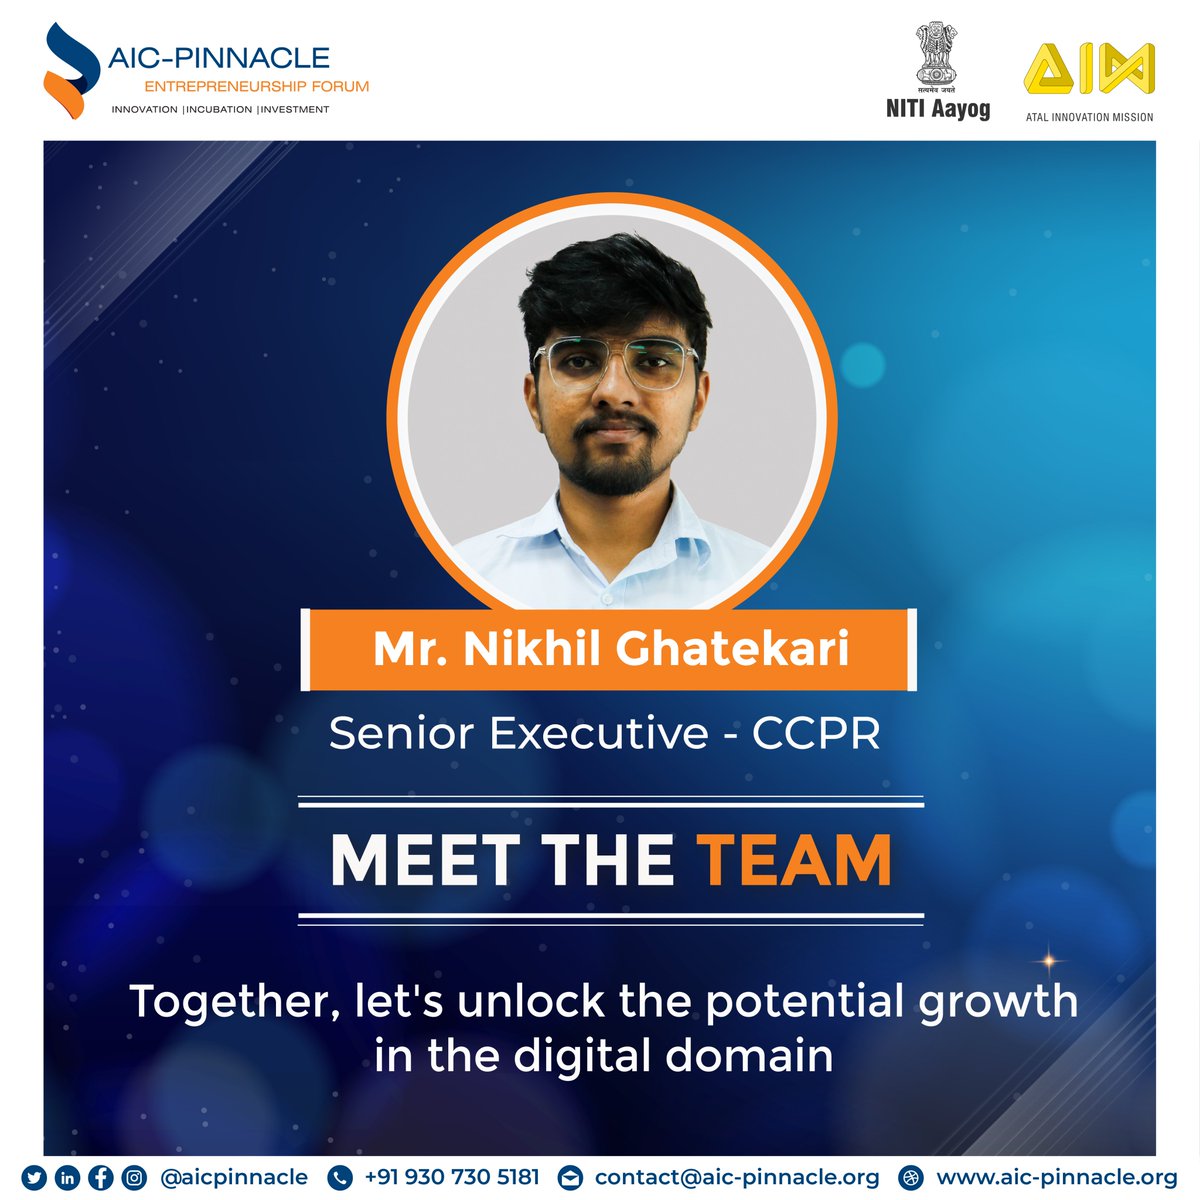 #MeetTheTeam

Atal Incubation Centre - Pinnacle Industries is thrilled to introduce Mr. Nikhil Ghatekari as the newest inclusion to our Corporate Communications & Public Relations department.